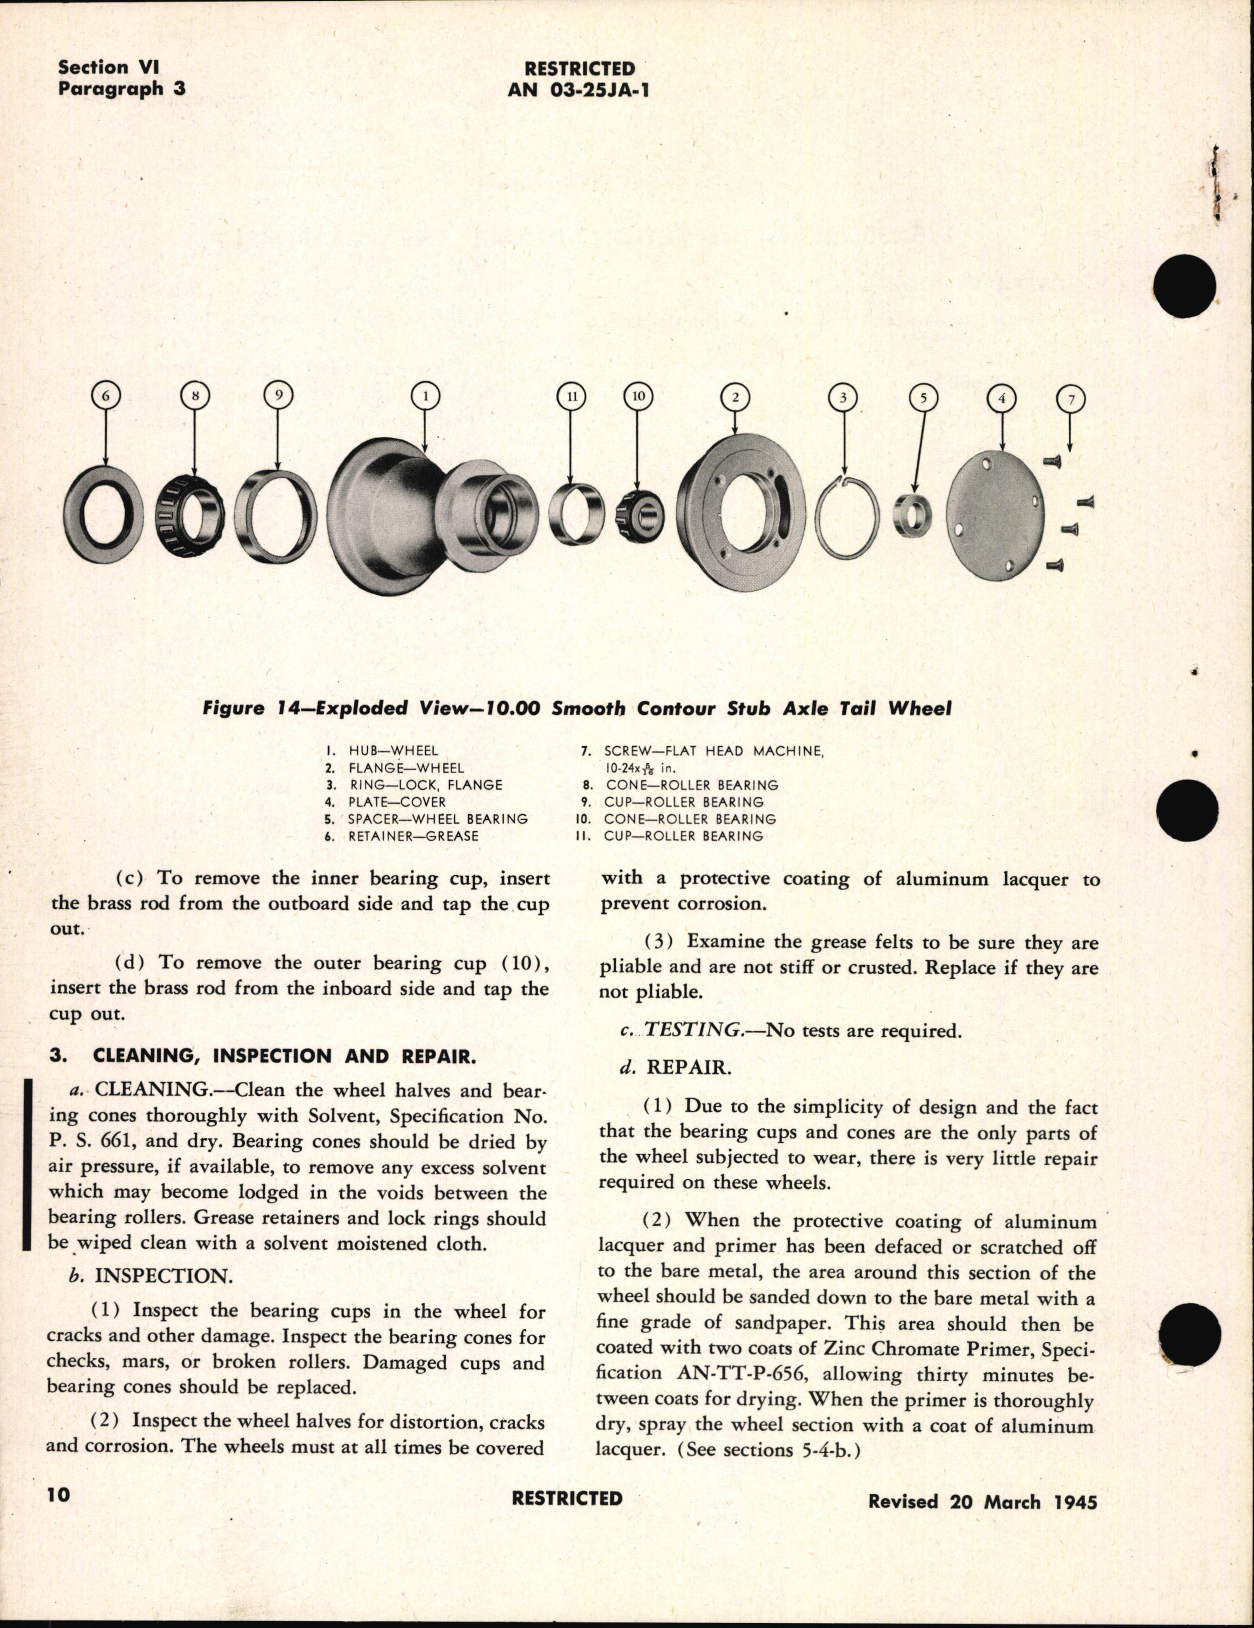 Sample page 6 from AirCorps Library document: Handbook of Instructions with Parts Catalog for Smooth Contour Tail Wheels